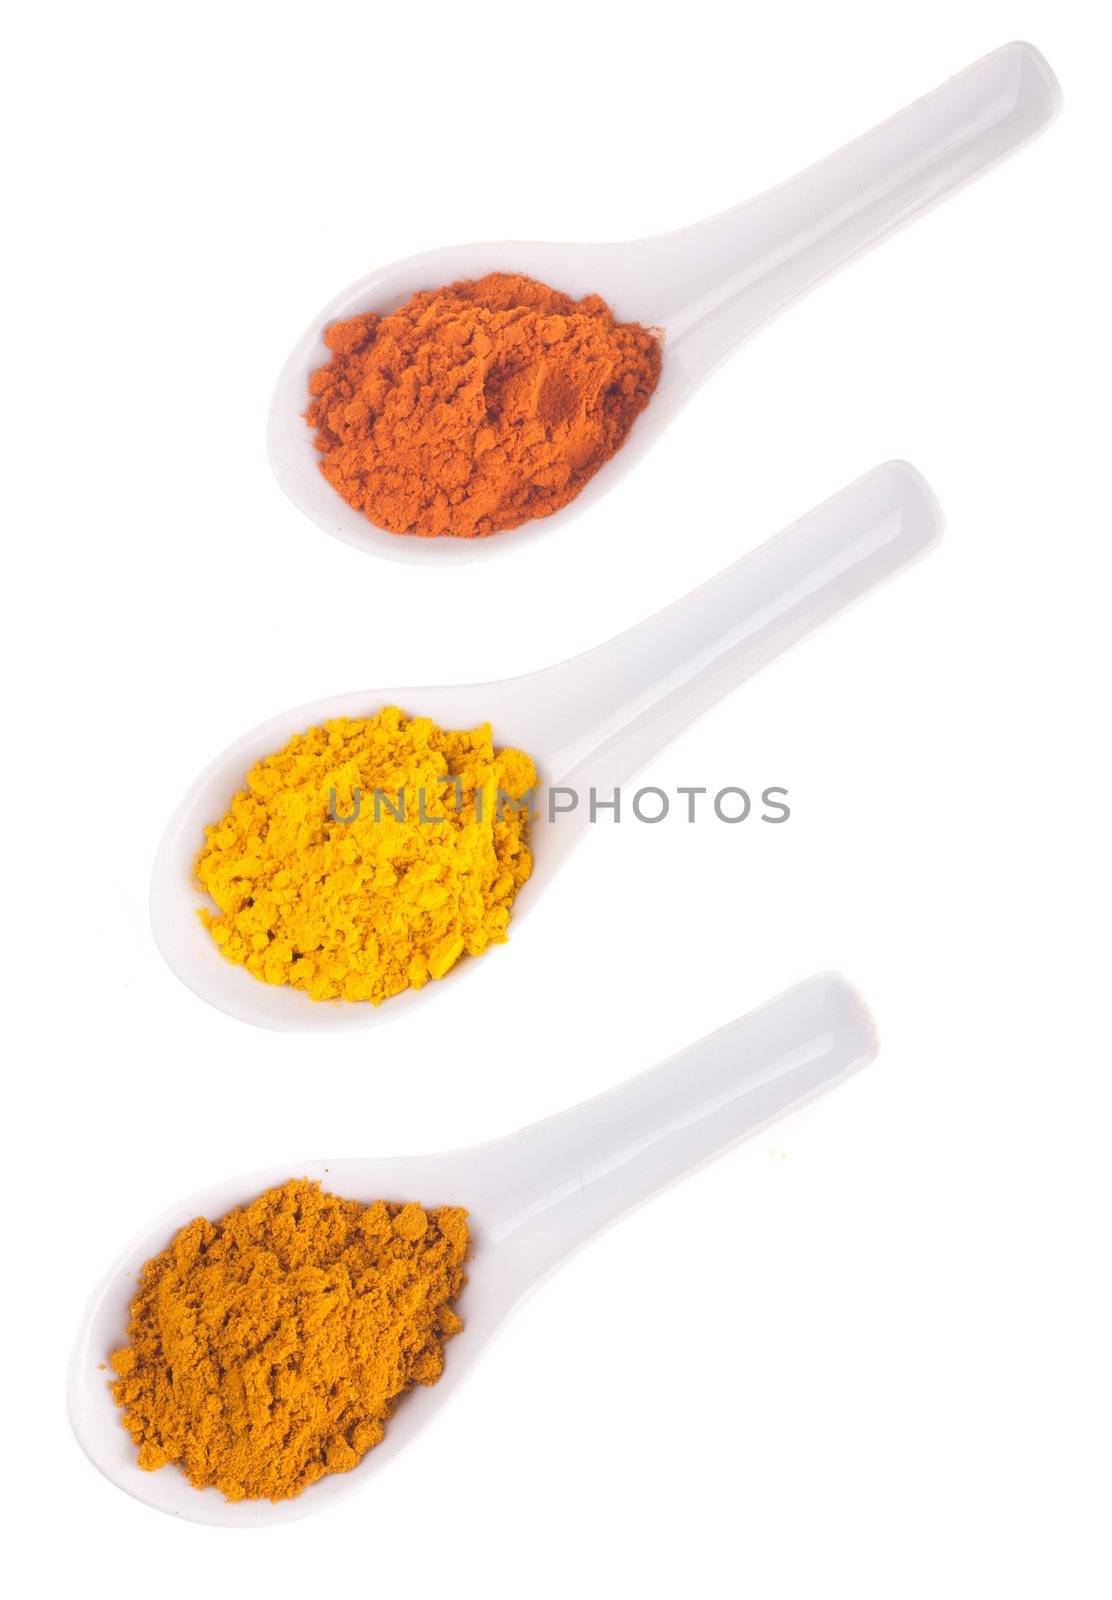 Spices by tehcheesiong